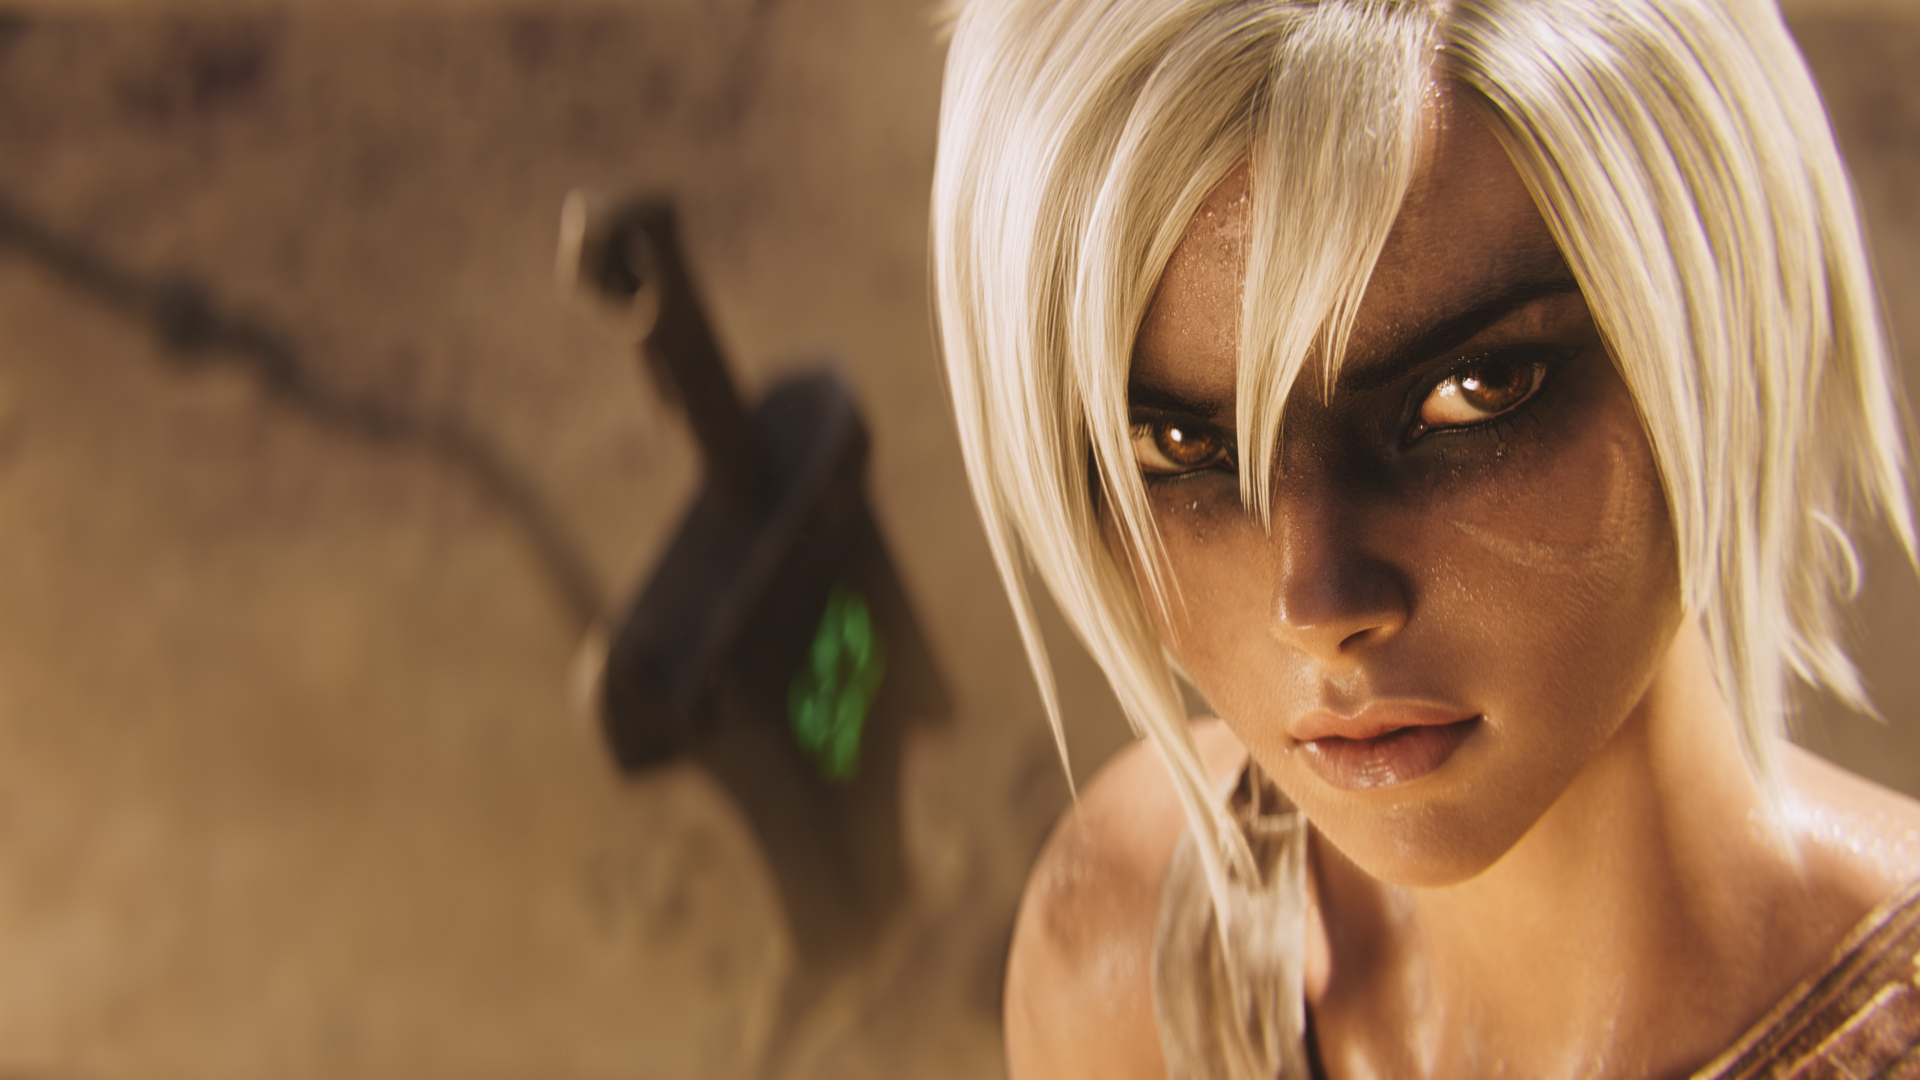 league of legends fan gives riven s character model a stunning visual update dot esports league of legends fan gives riven s